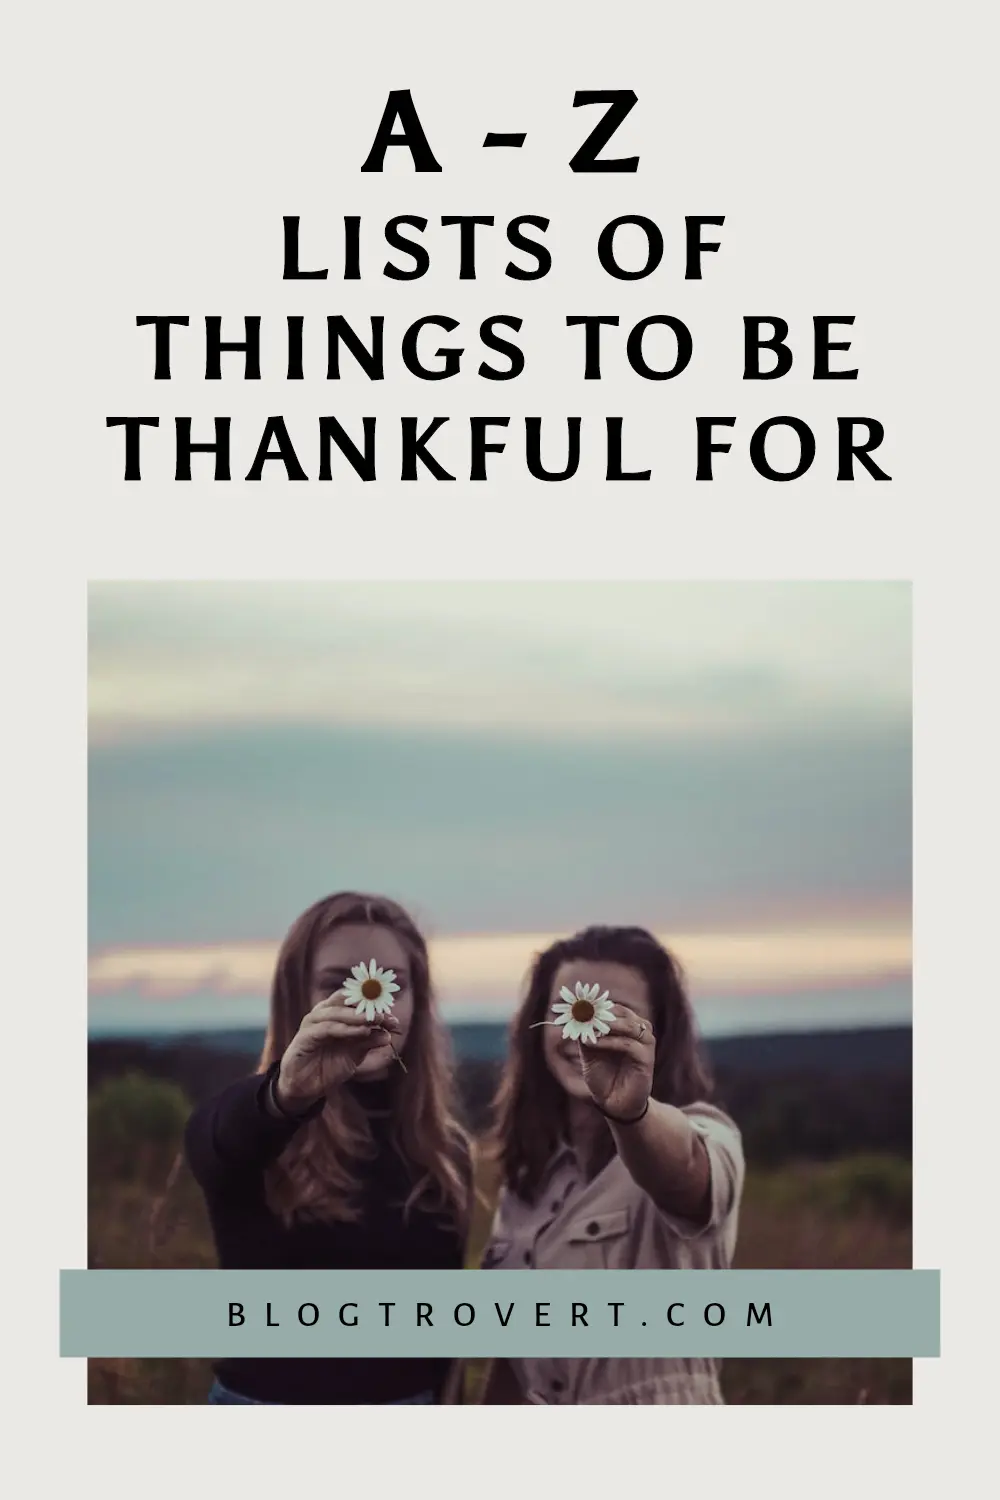 A-Z Unique Gratitude List Ideas - 100 things to be thankful for everyday 1